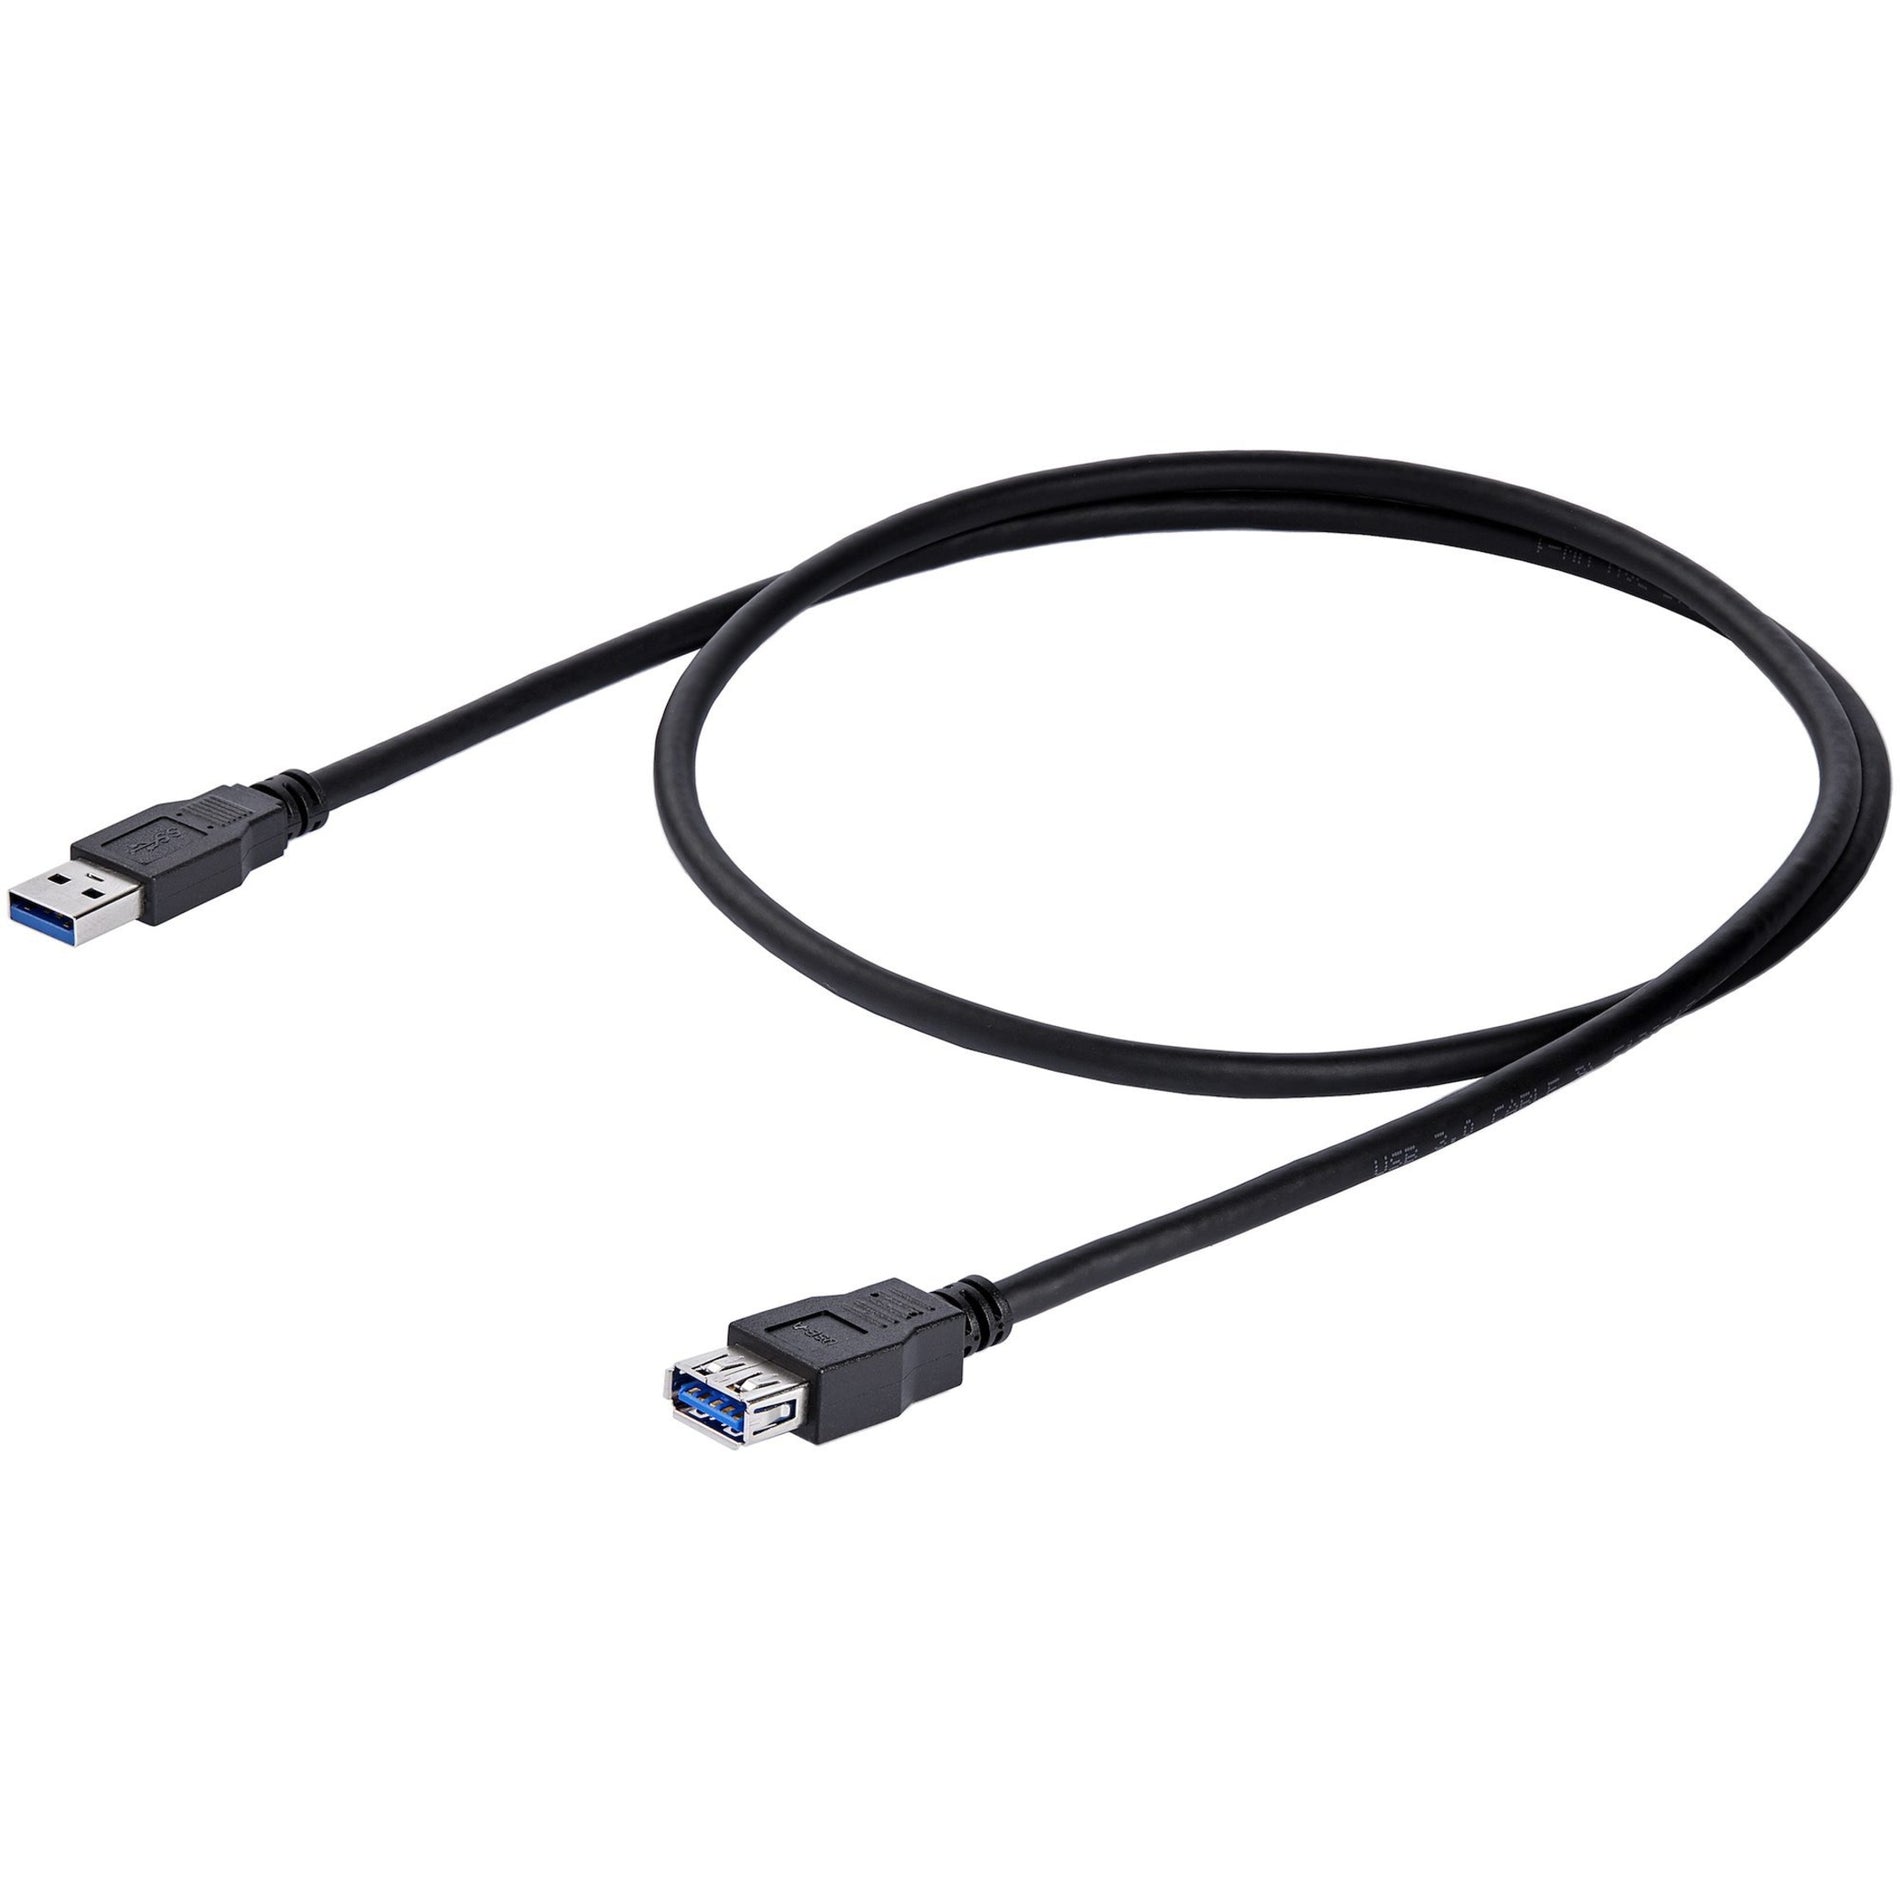 StarTech.com USB3SEXT1MBK 1m Black SuperSpeed USB 3.0 Extension Cable A to A - M/F, 5 Gbit/s Data Transfer Rate